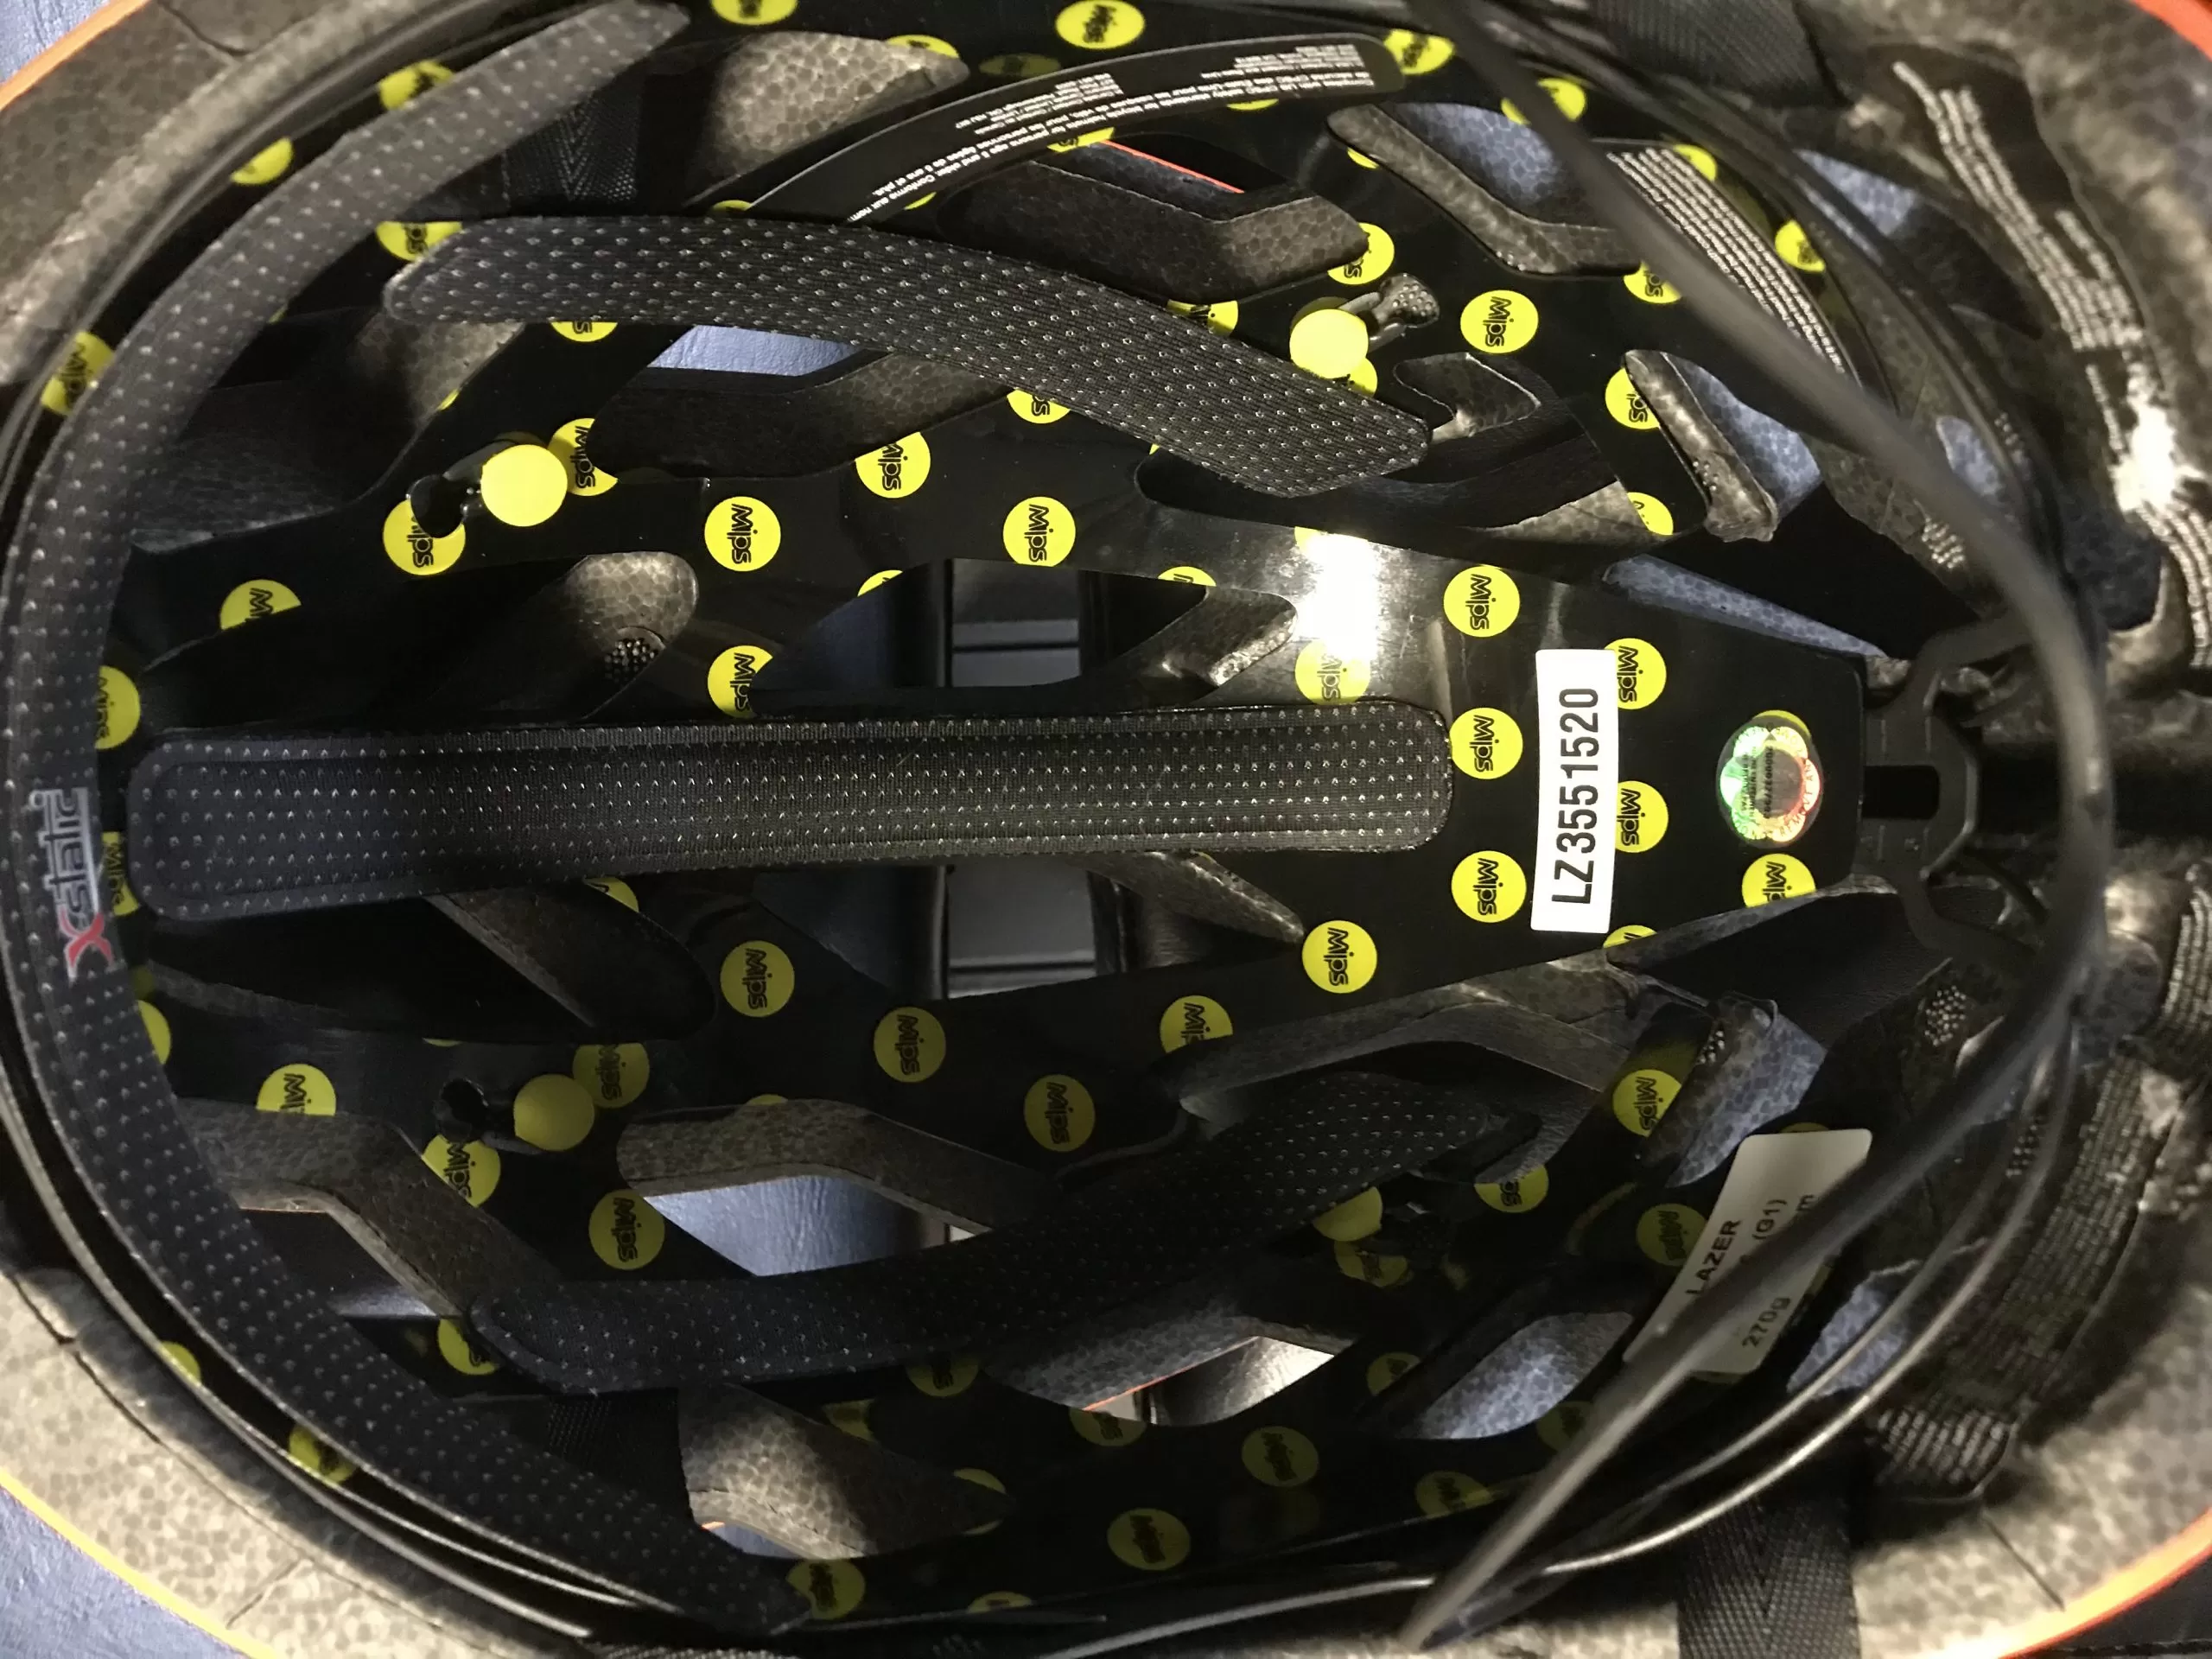 MIPS Found in many of the Cycling Helmets